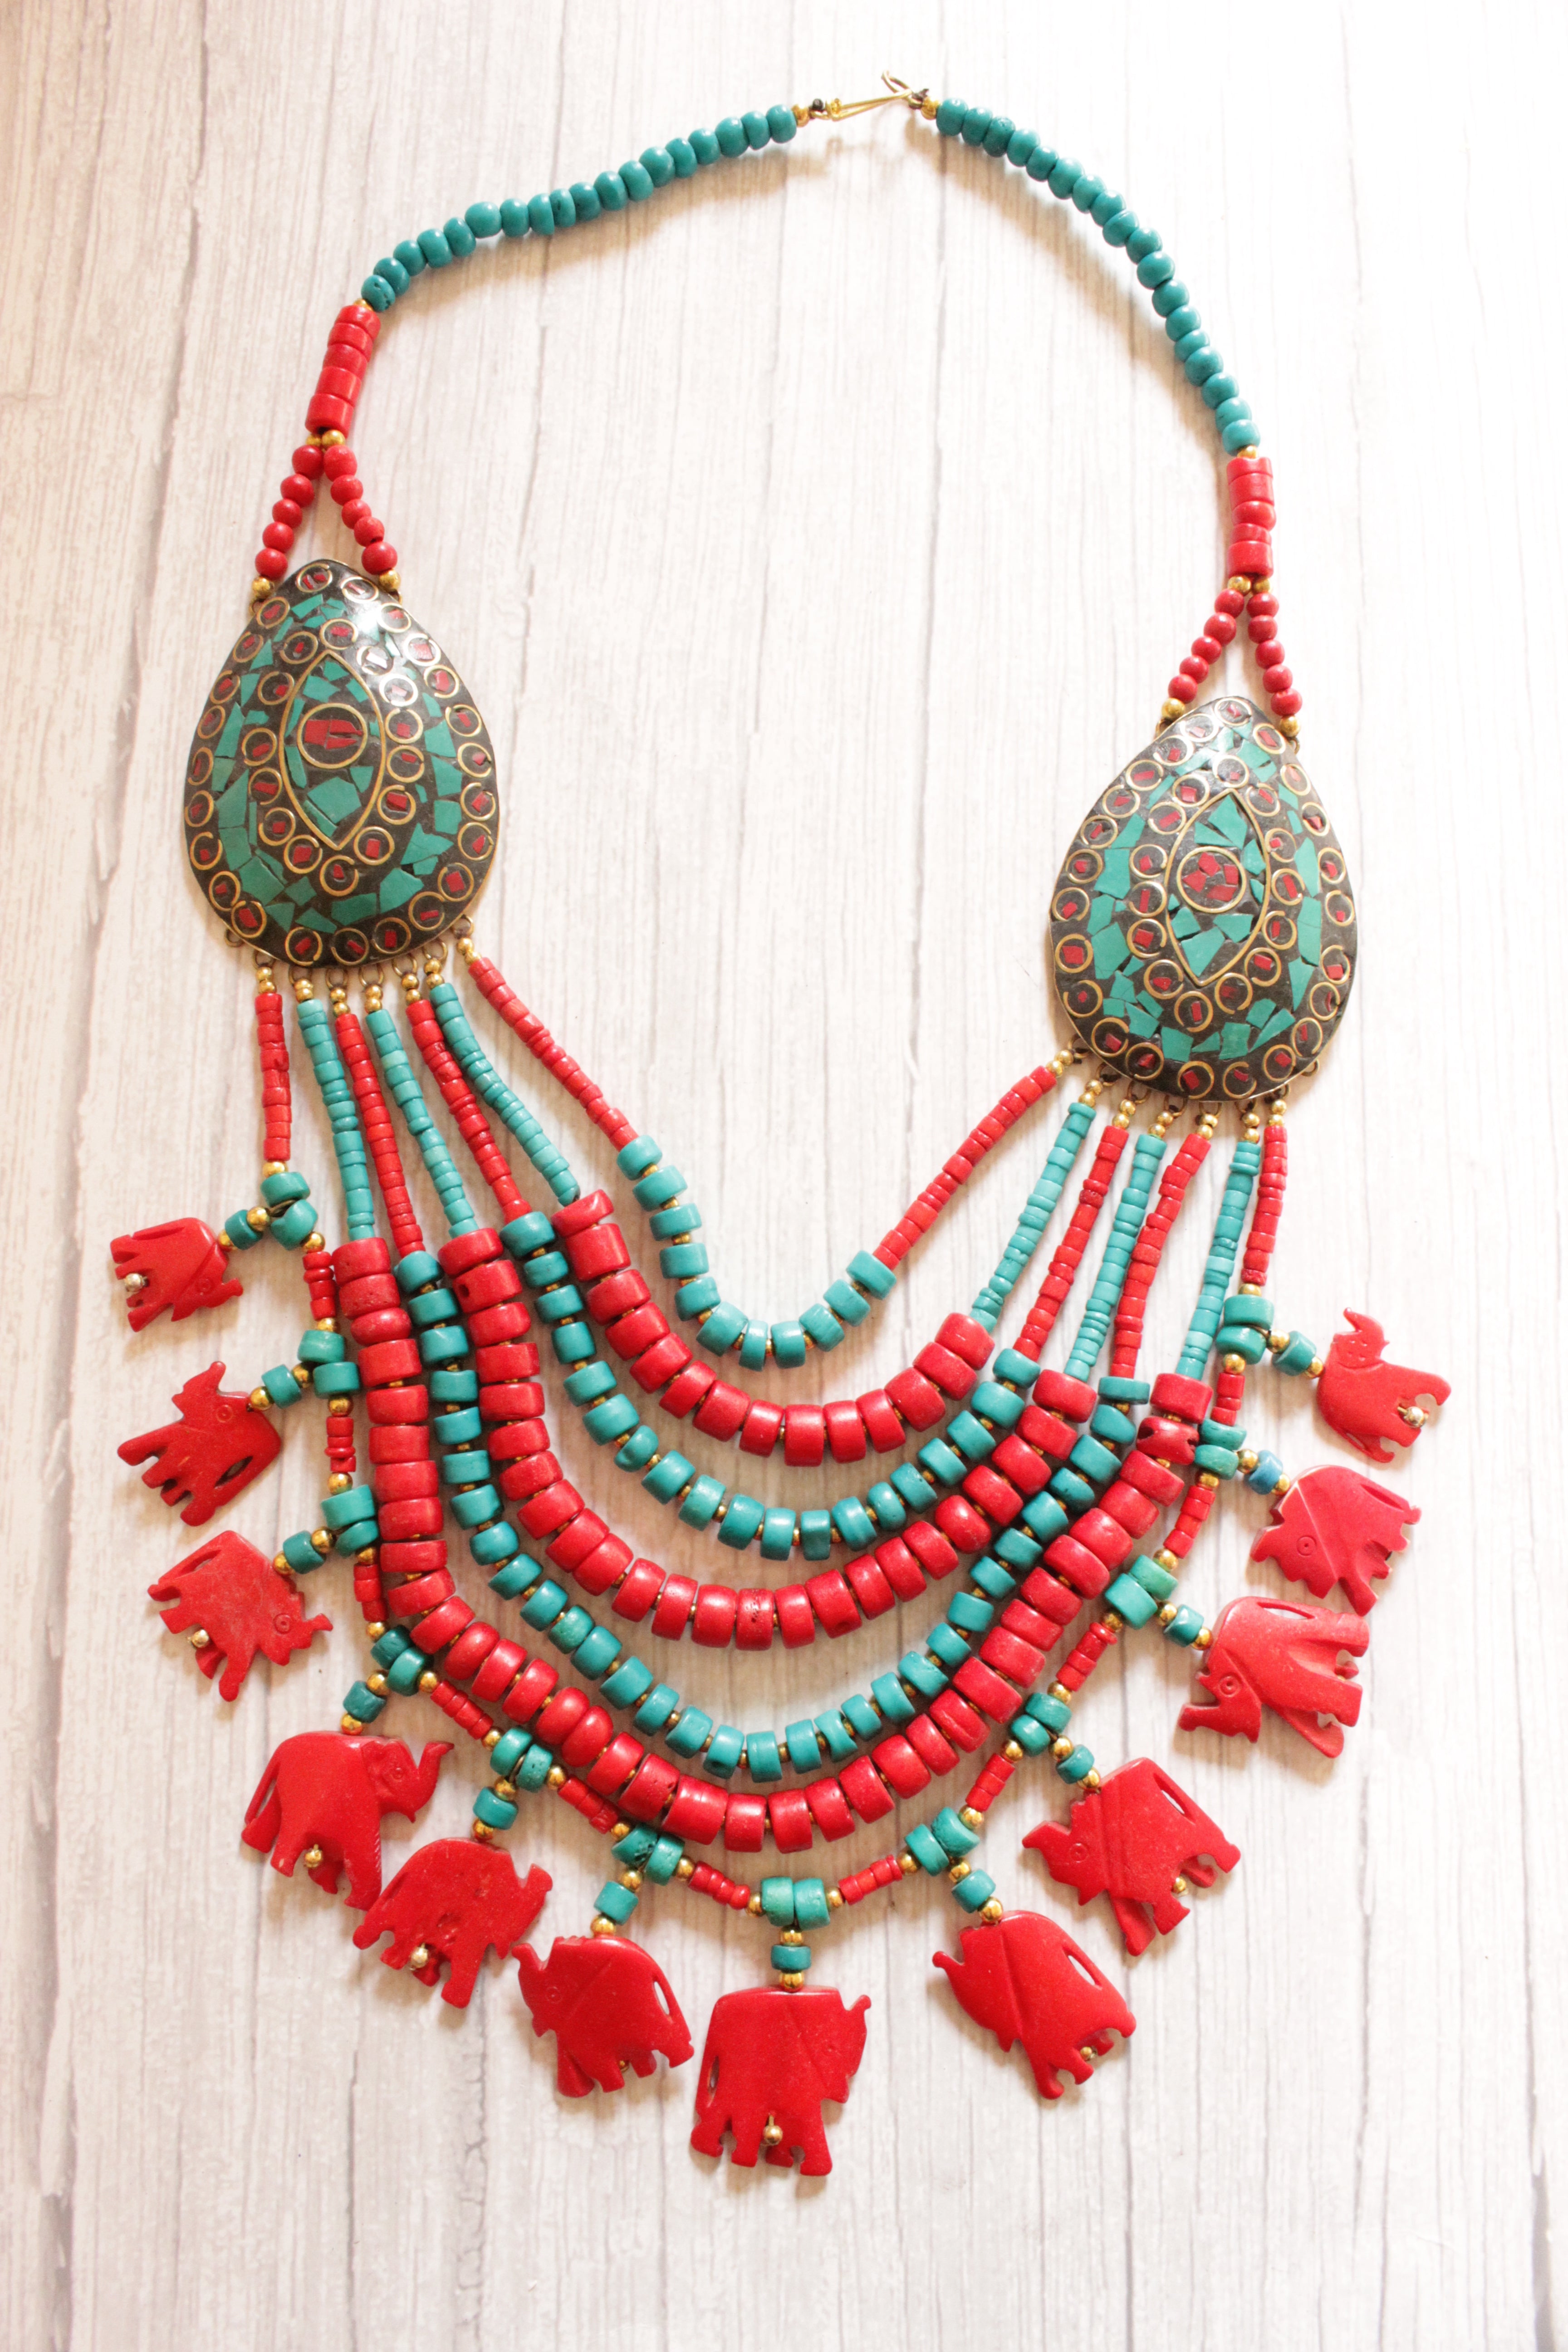 Turquoise and Red Beads Hand Beaded Statement African Tribal Necklace with Elephant Charms